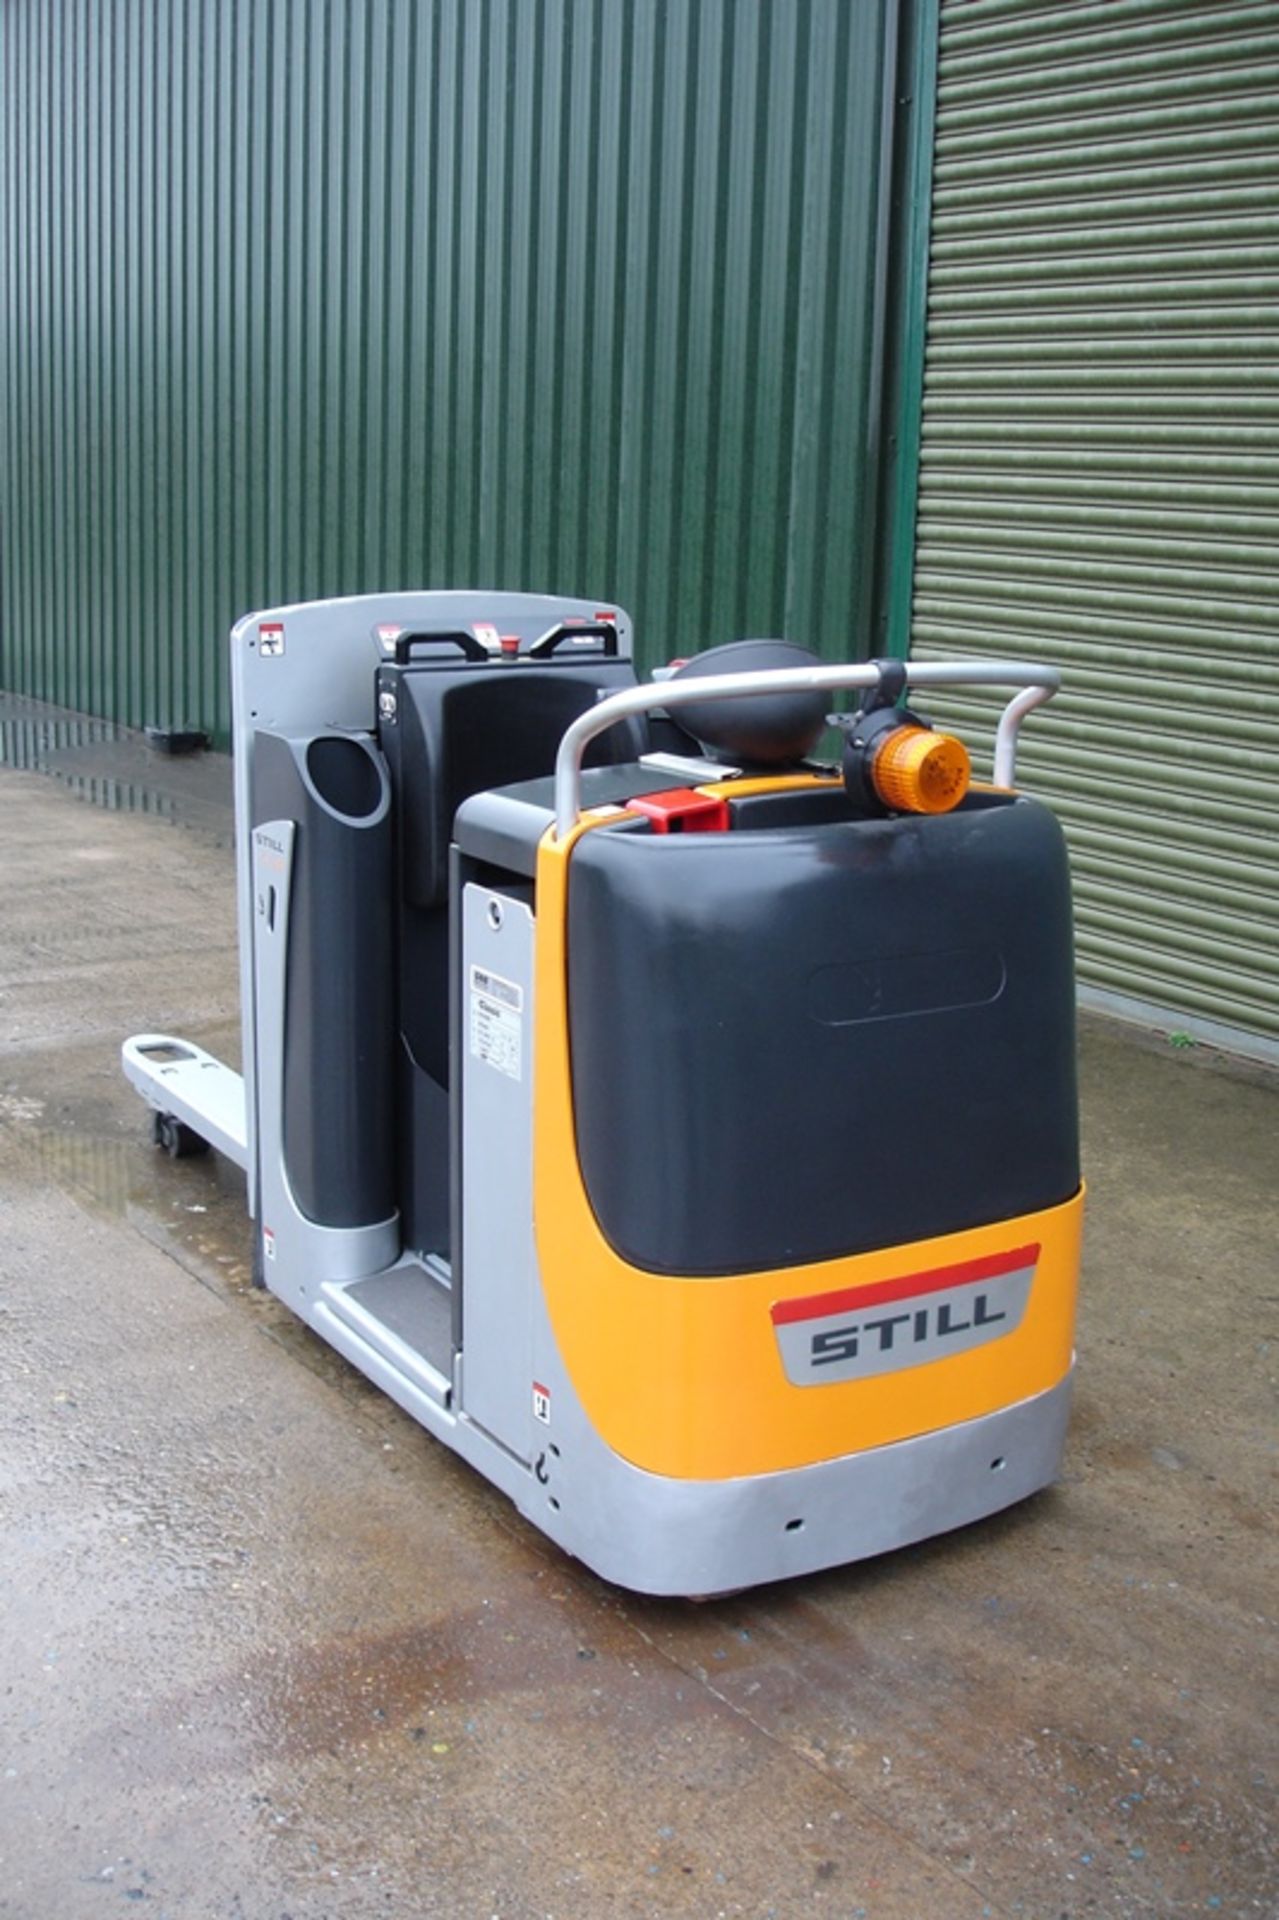 Still Electric ride on Pallet Truck - Image 2 of 10